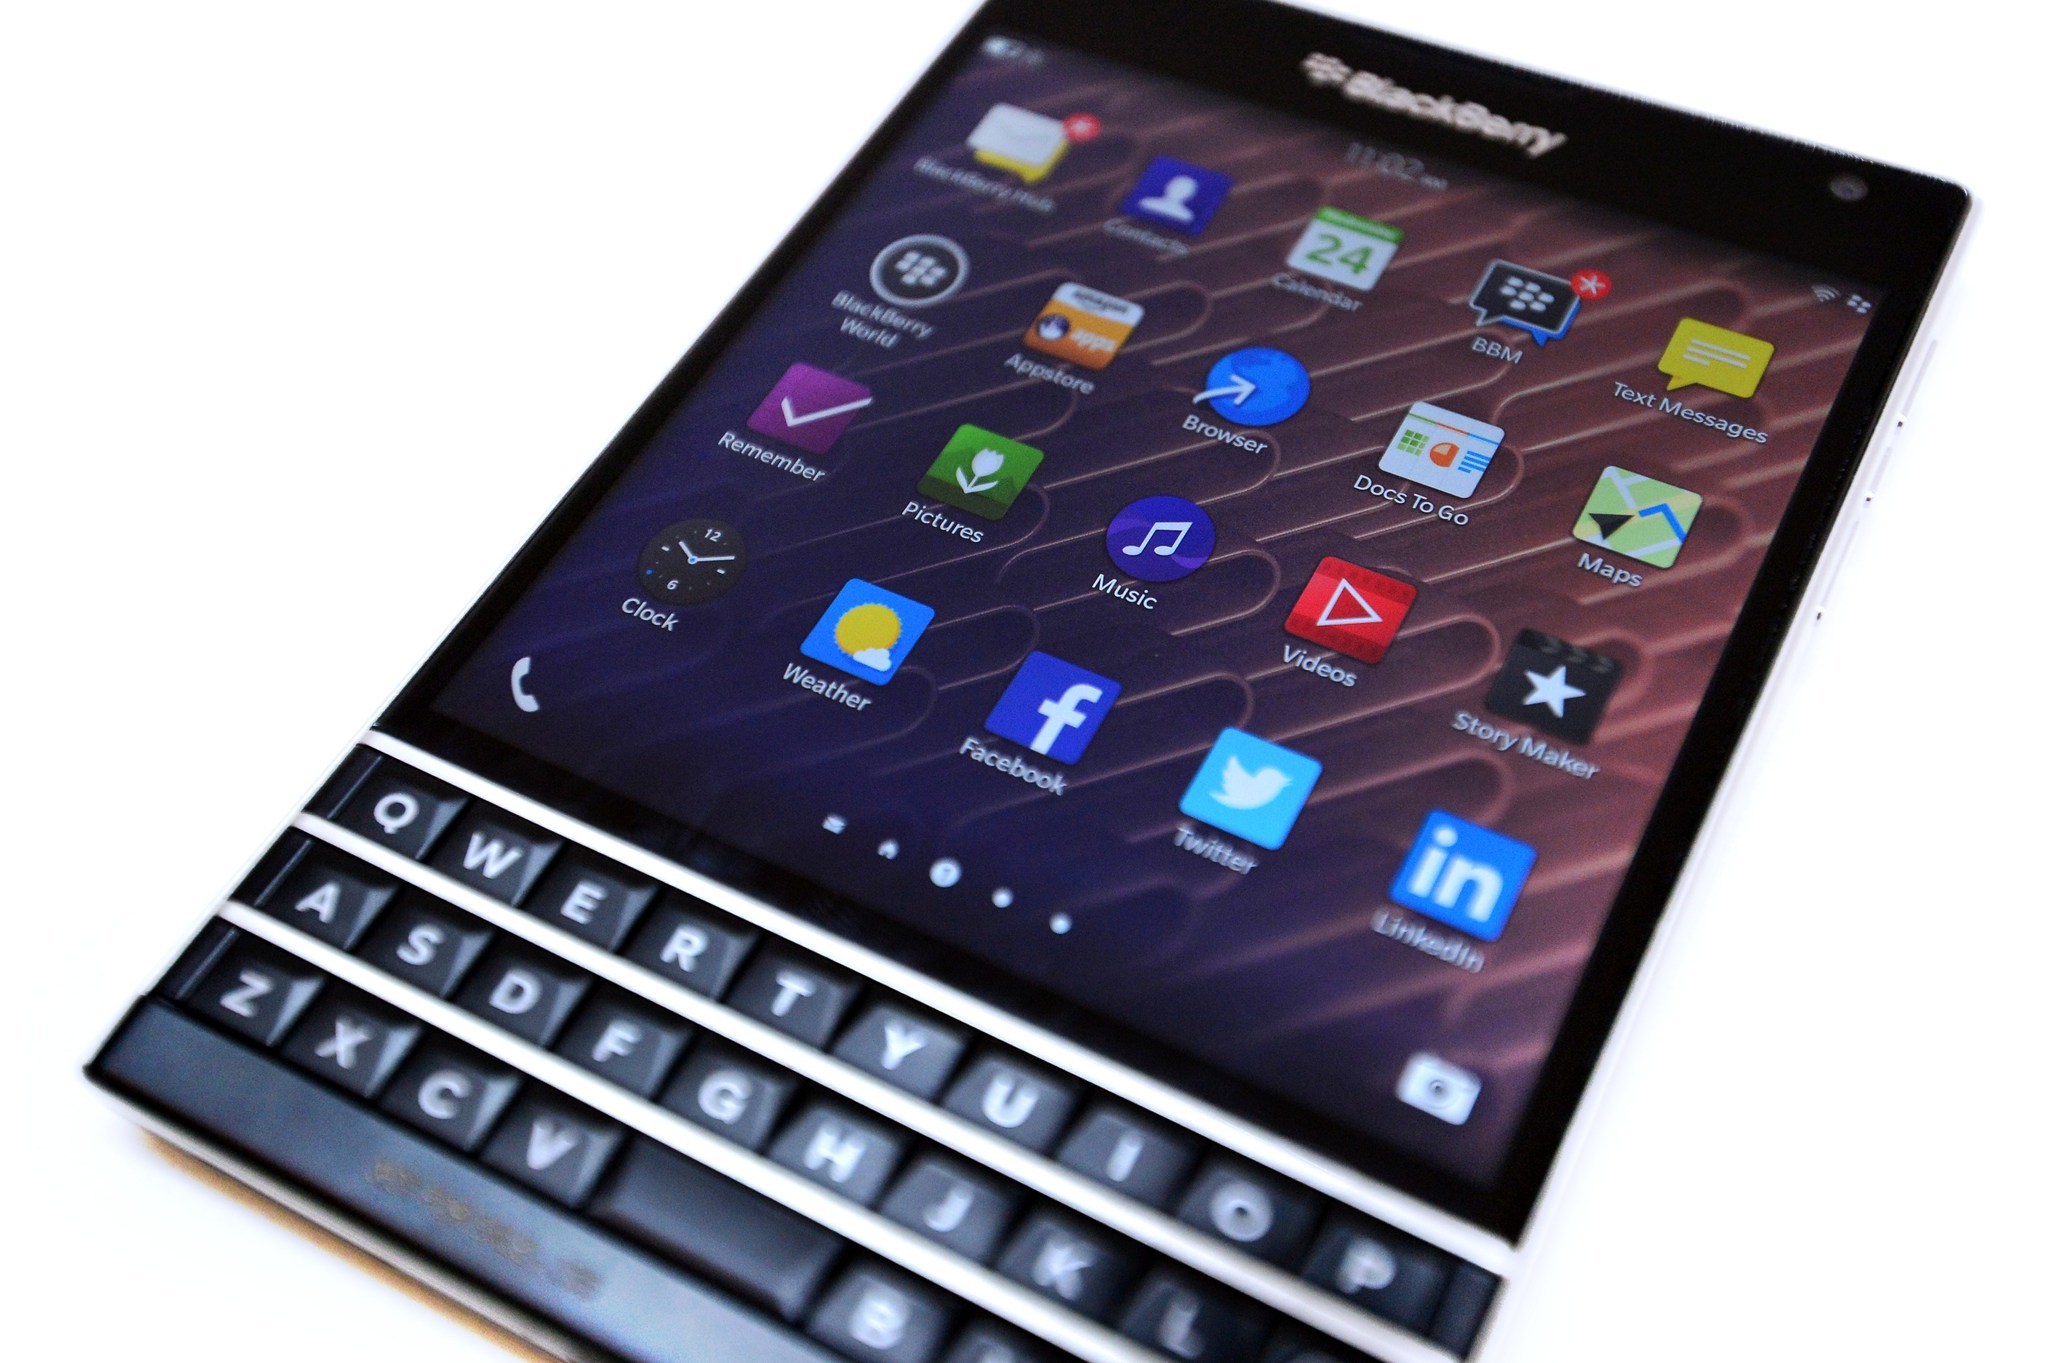 Get a closer look at the BlackBerry Passport (pictures) - CNET